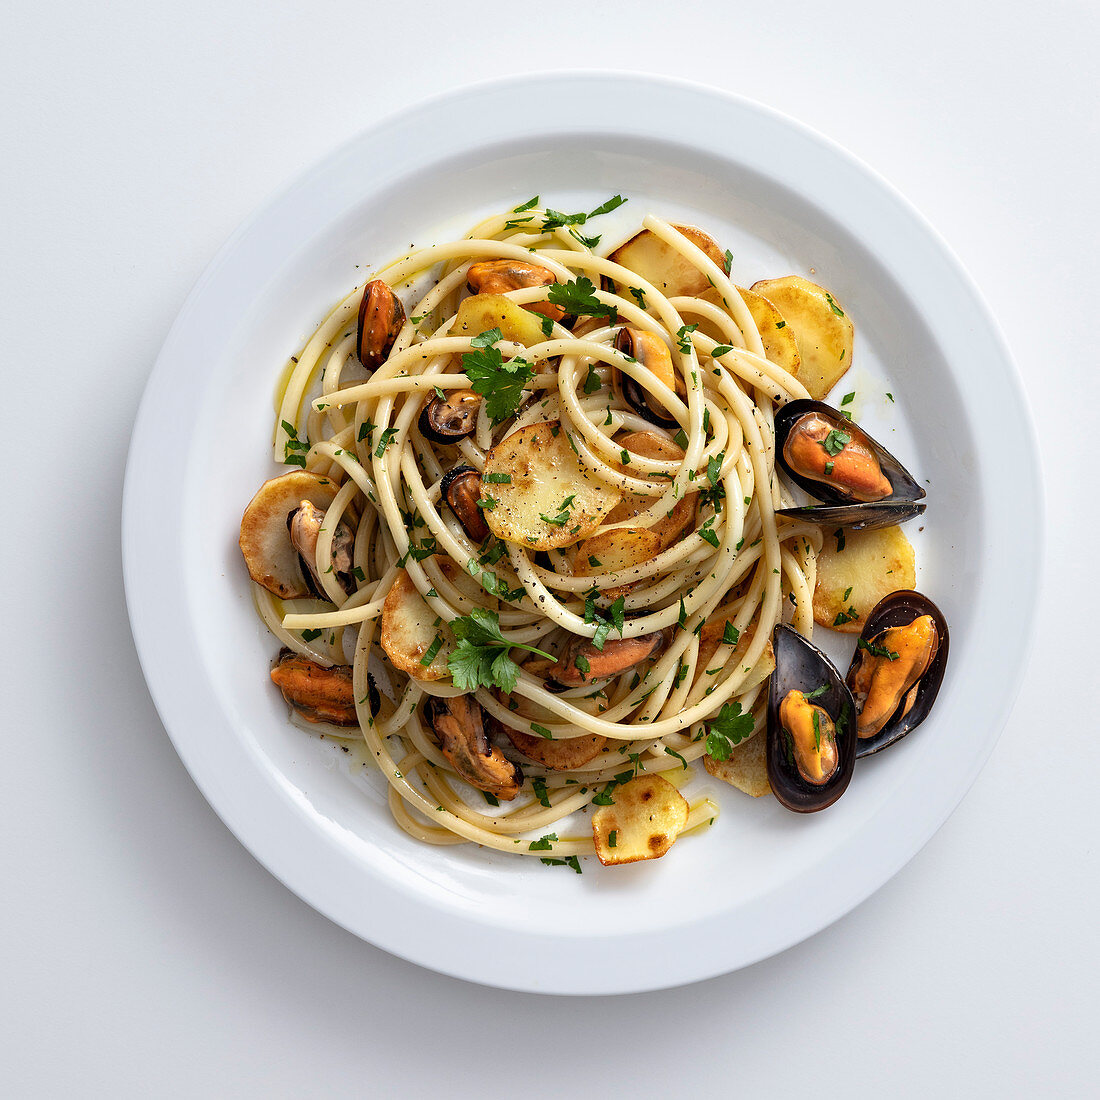 Spaghetti with fried potatoes, fried garlic and mussels